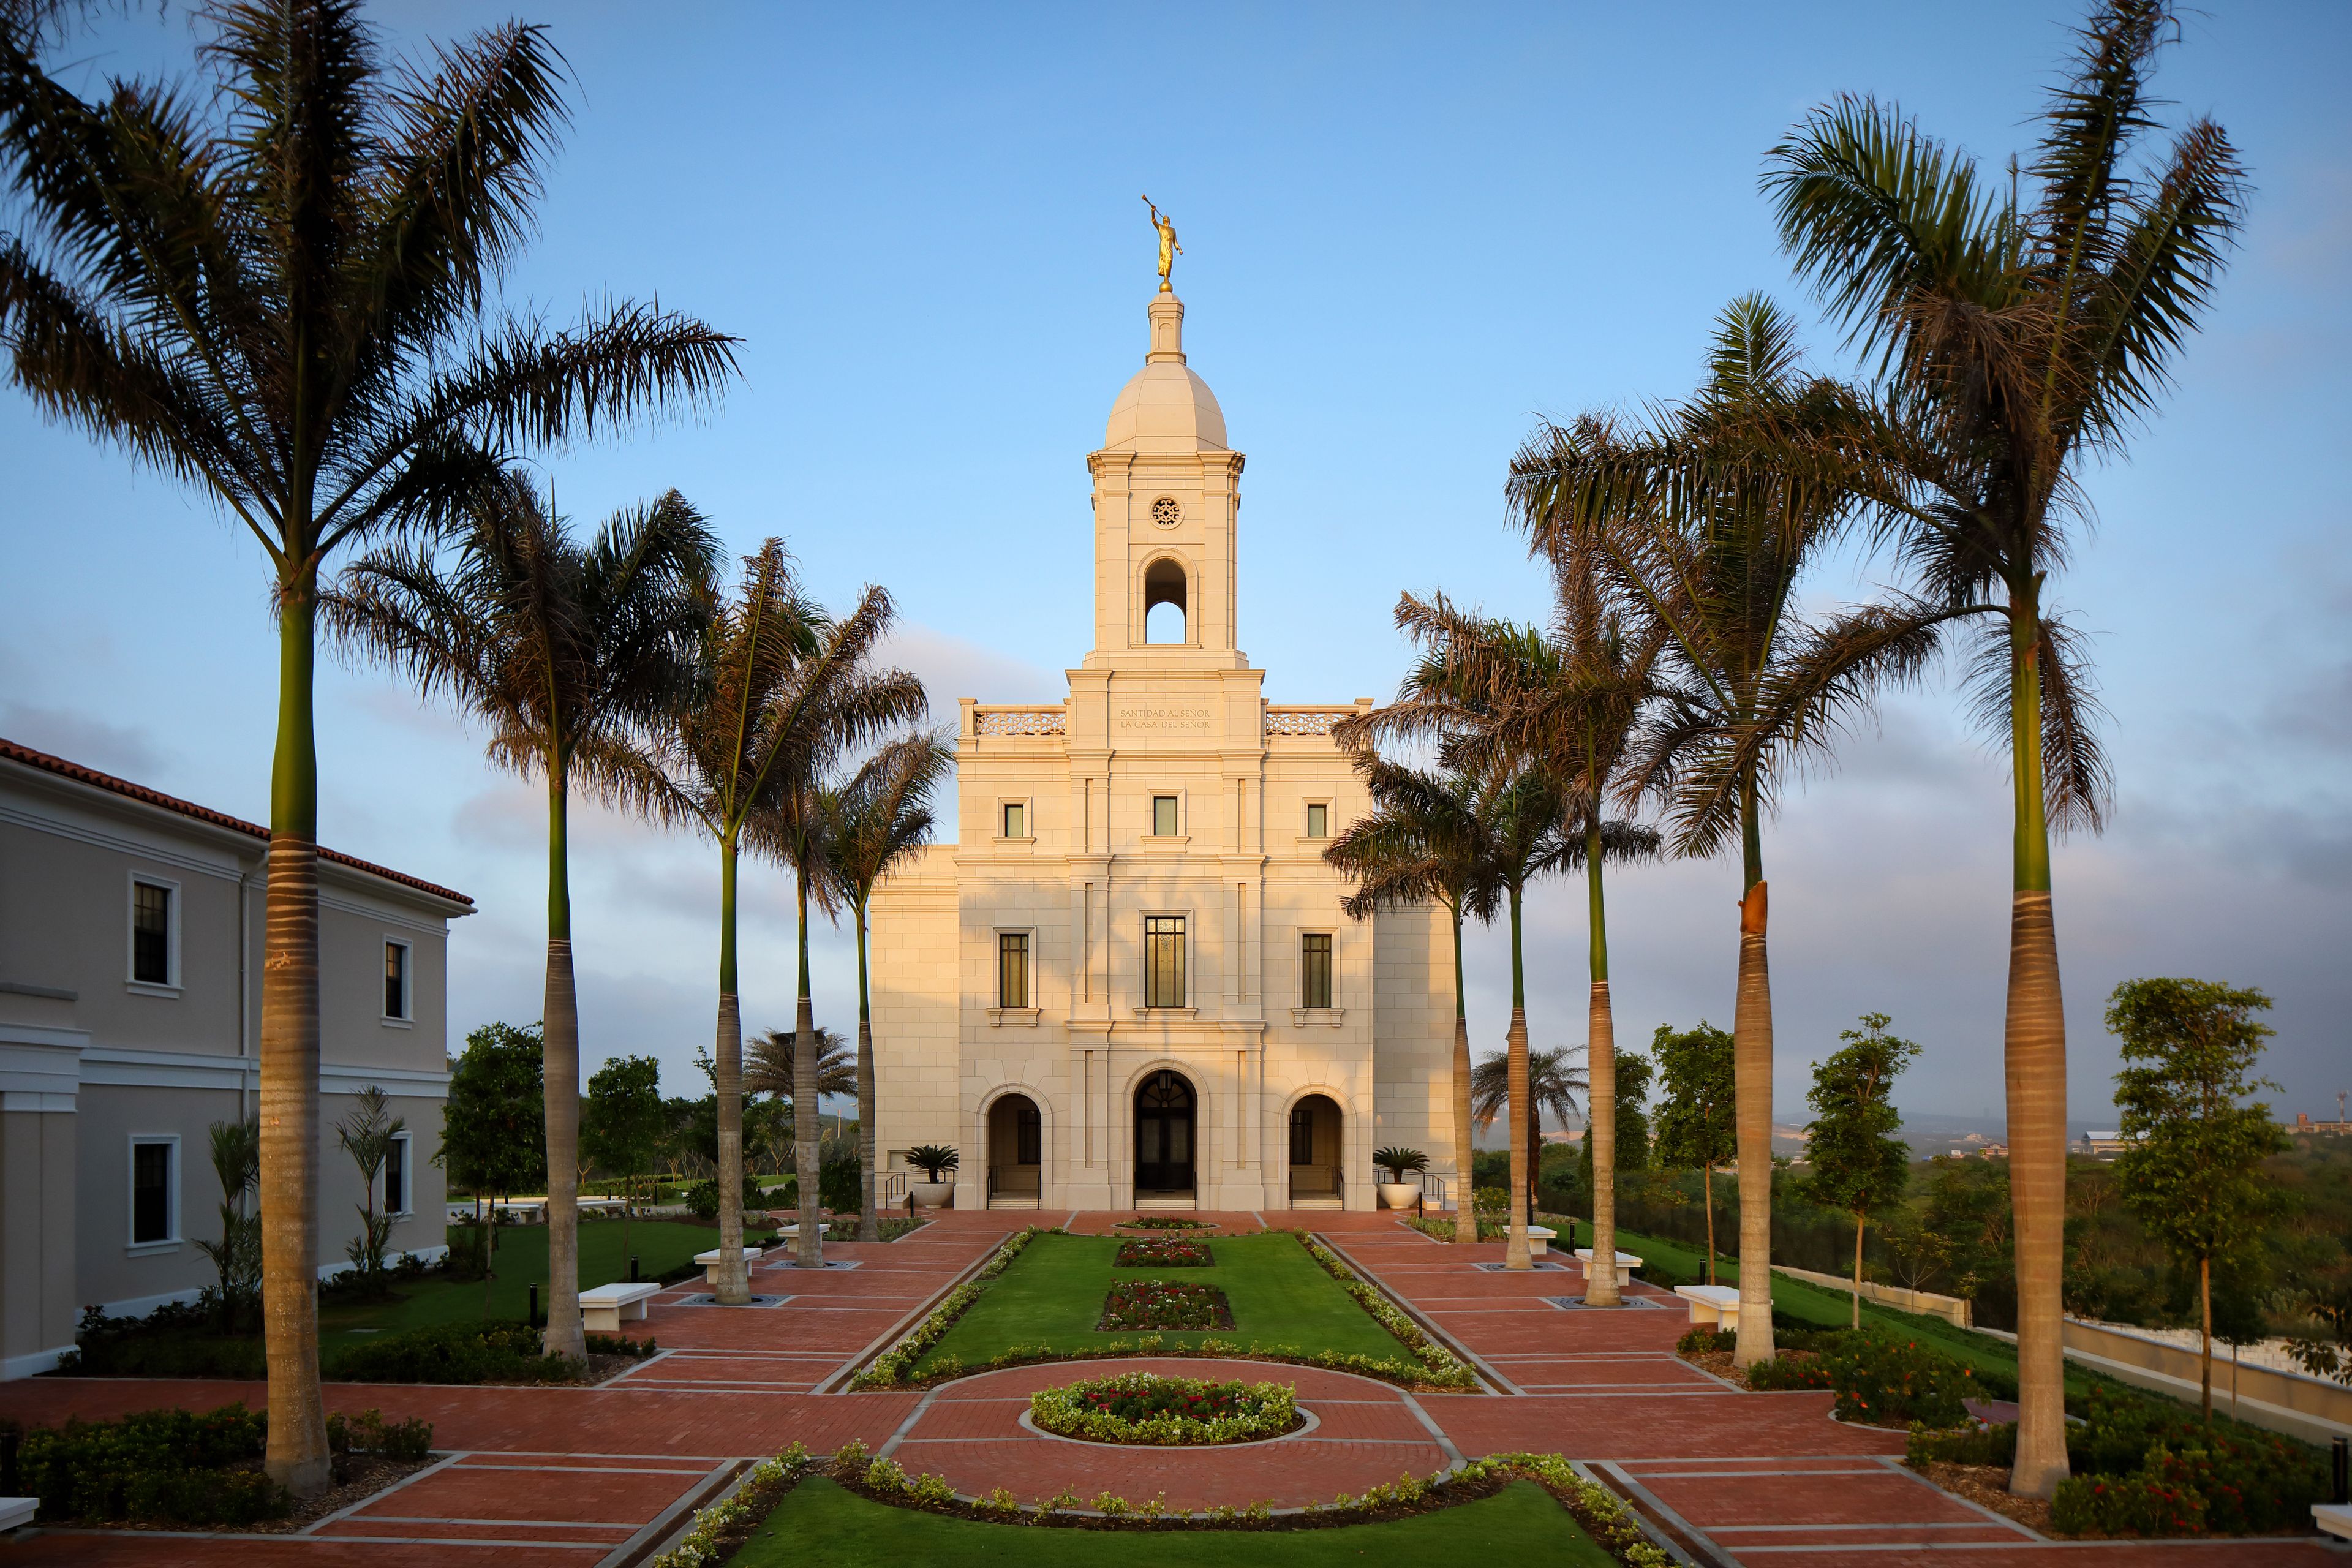 A front view of the Barranquilla Colombia Temple, with palm trees lining the walkway to the entrance.